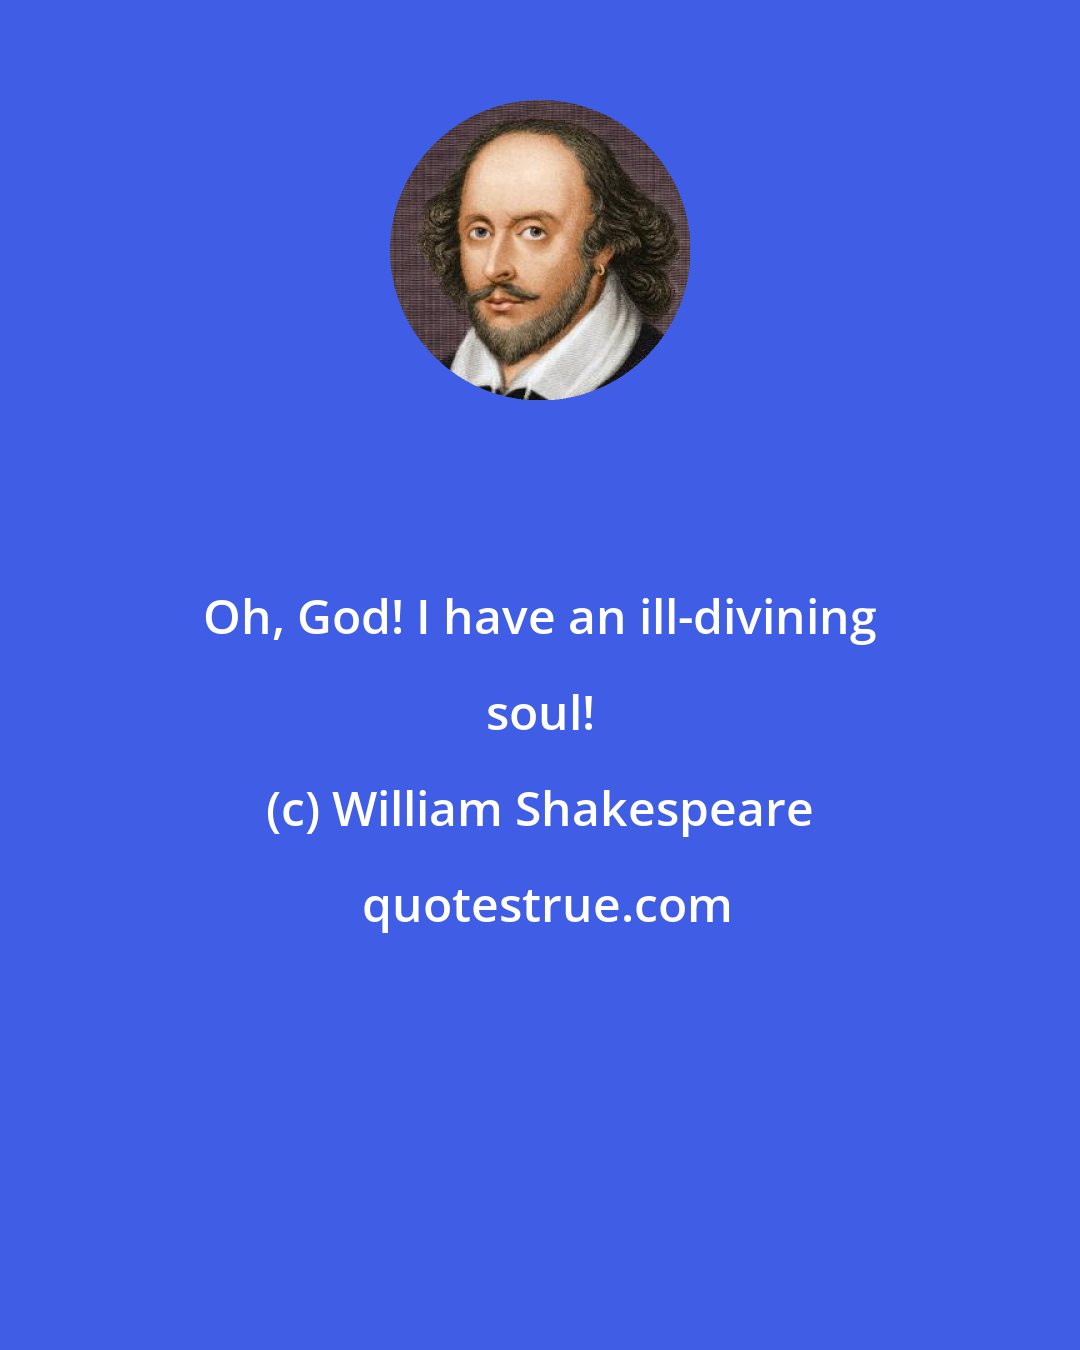 William Shakespeare: Oh, God! I have an ill-divining soul!